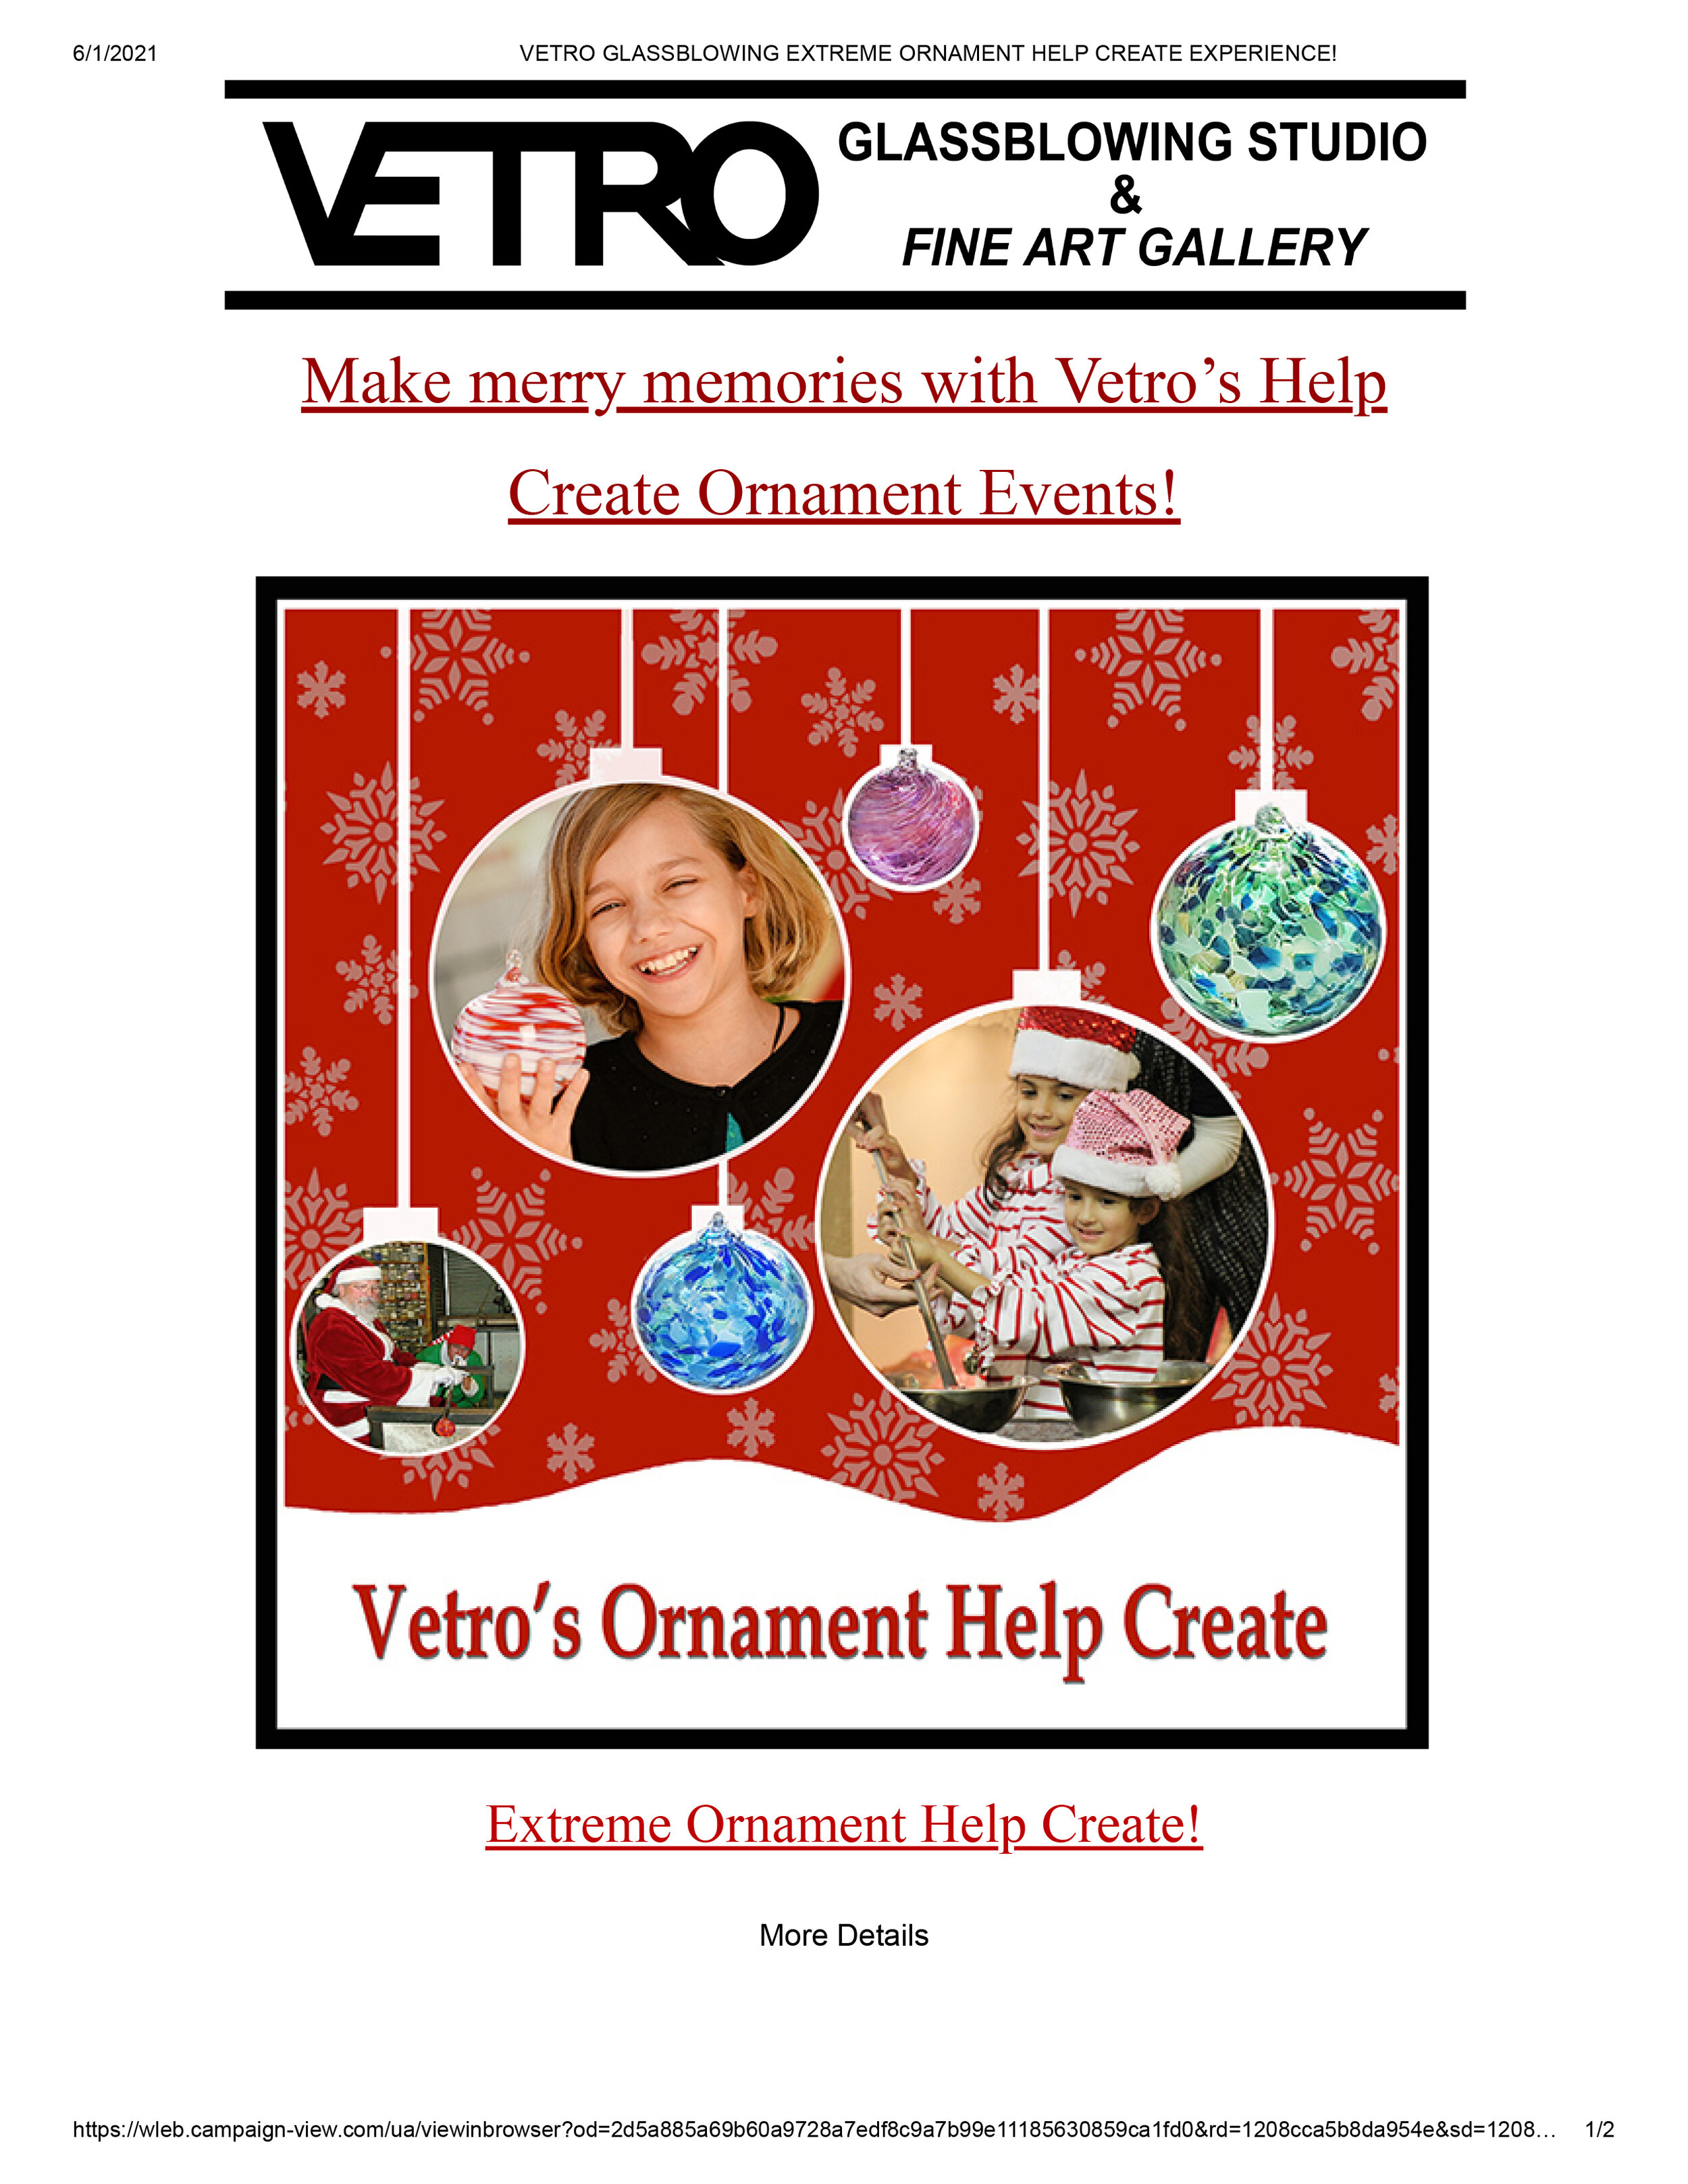 Email Campaigns -Vetro Glassblowing Studio - Make merry memories with Vetro’s Help Create Ornament Events-1.jpg